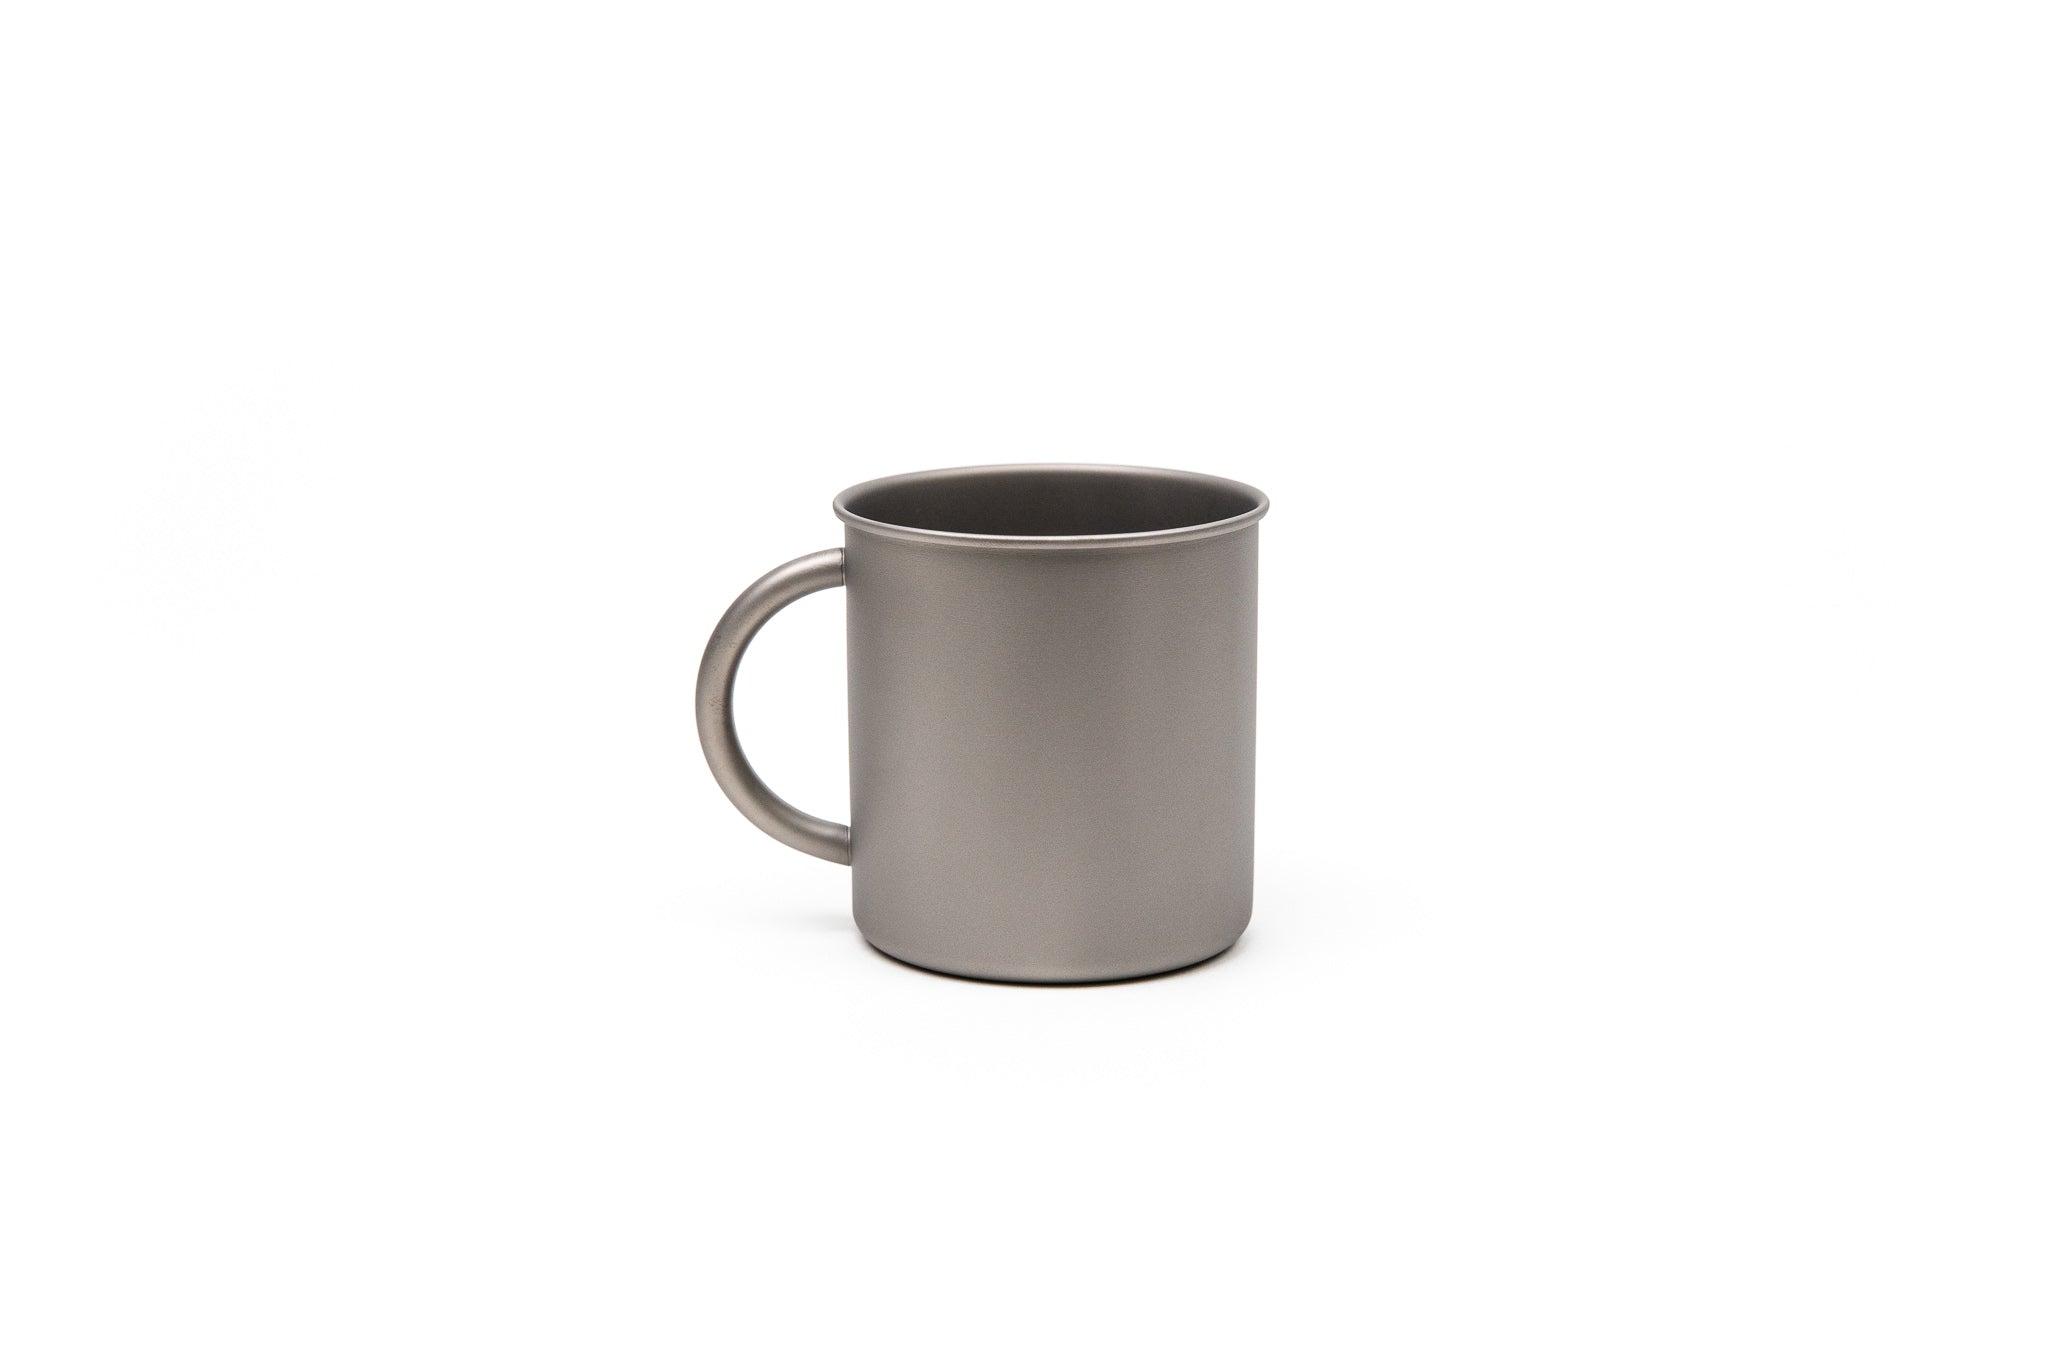 Dangle Supply disrupts camp mug industry with revolutionary new Titanium Cup